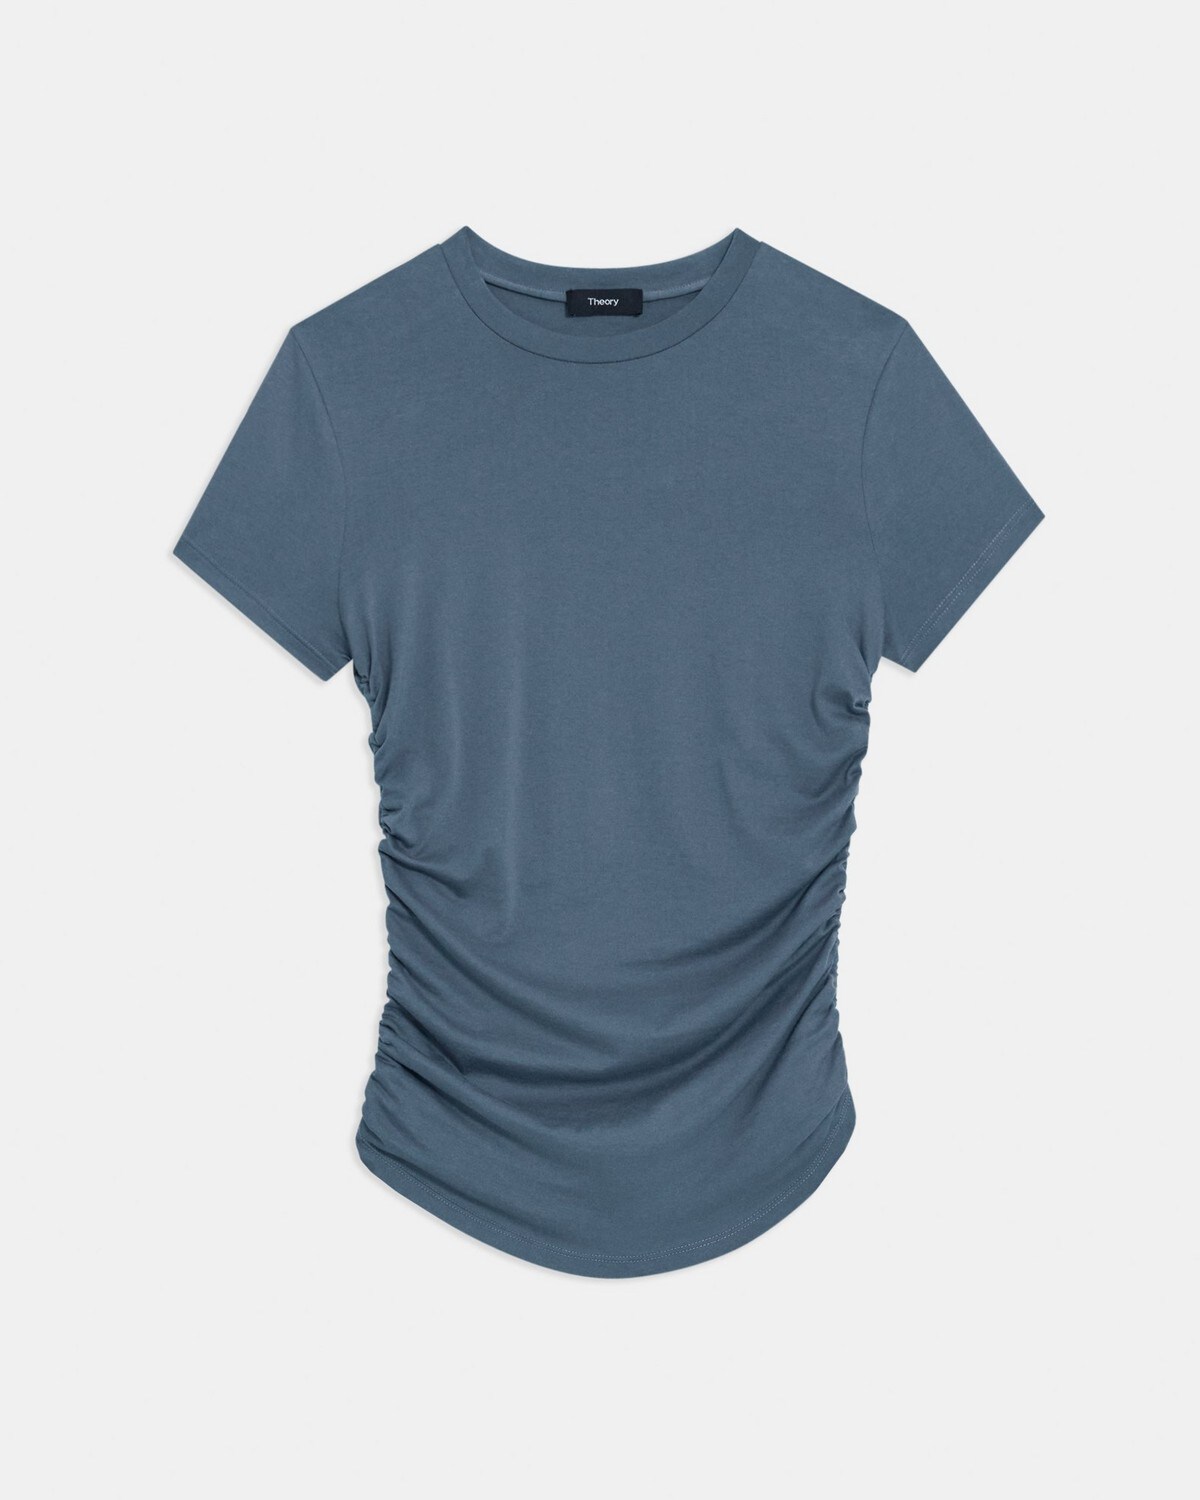 Ruched Tiny Tee in Cotton